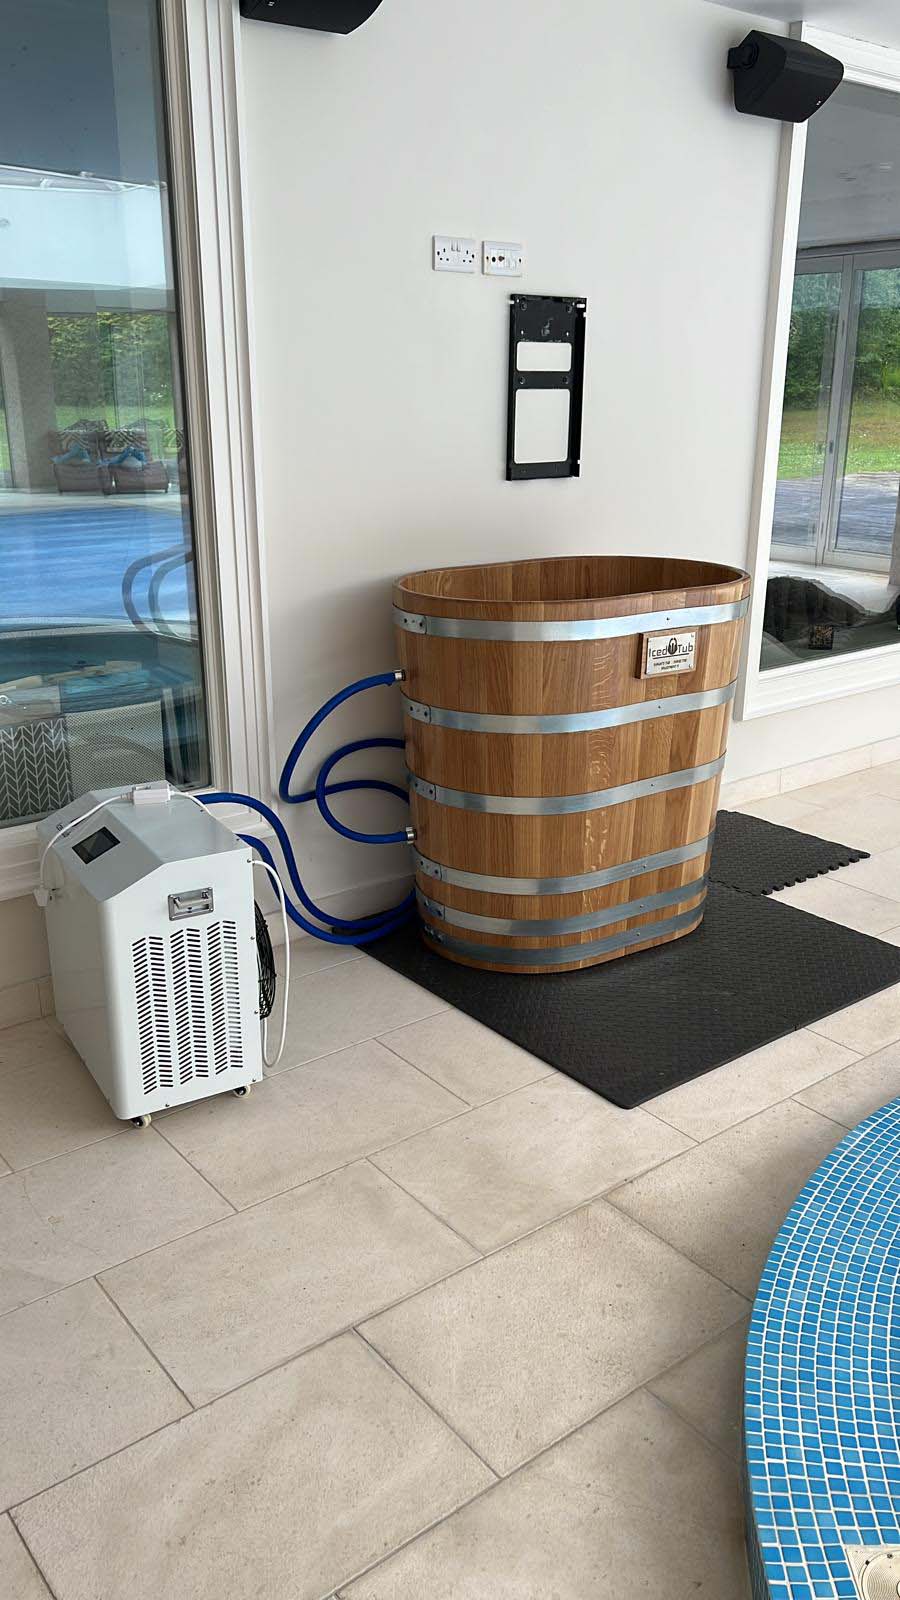 ice bath tub indoor set up with a chiller